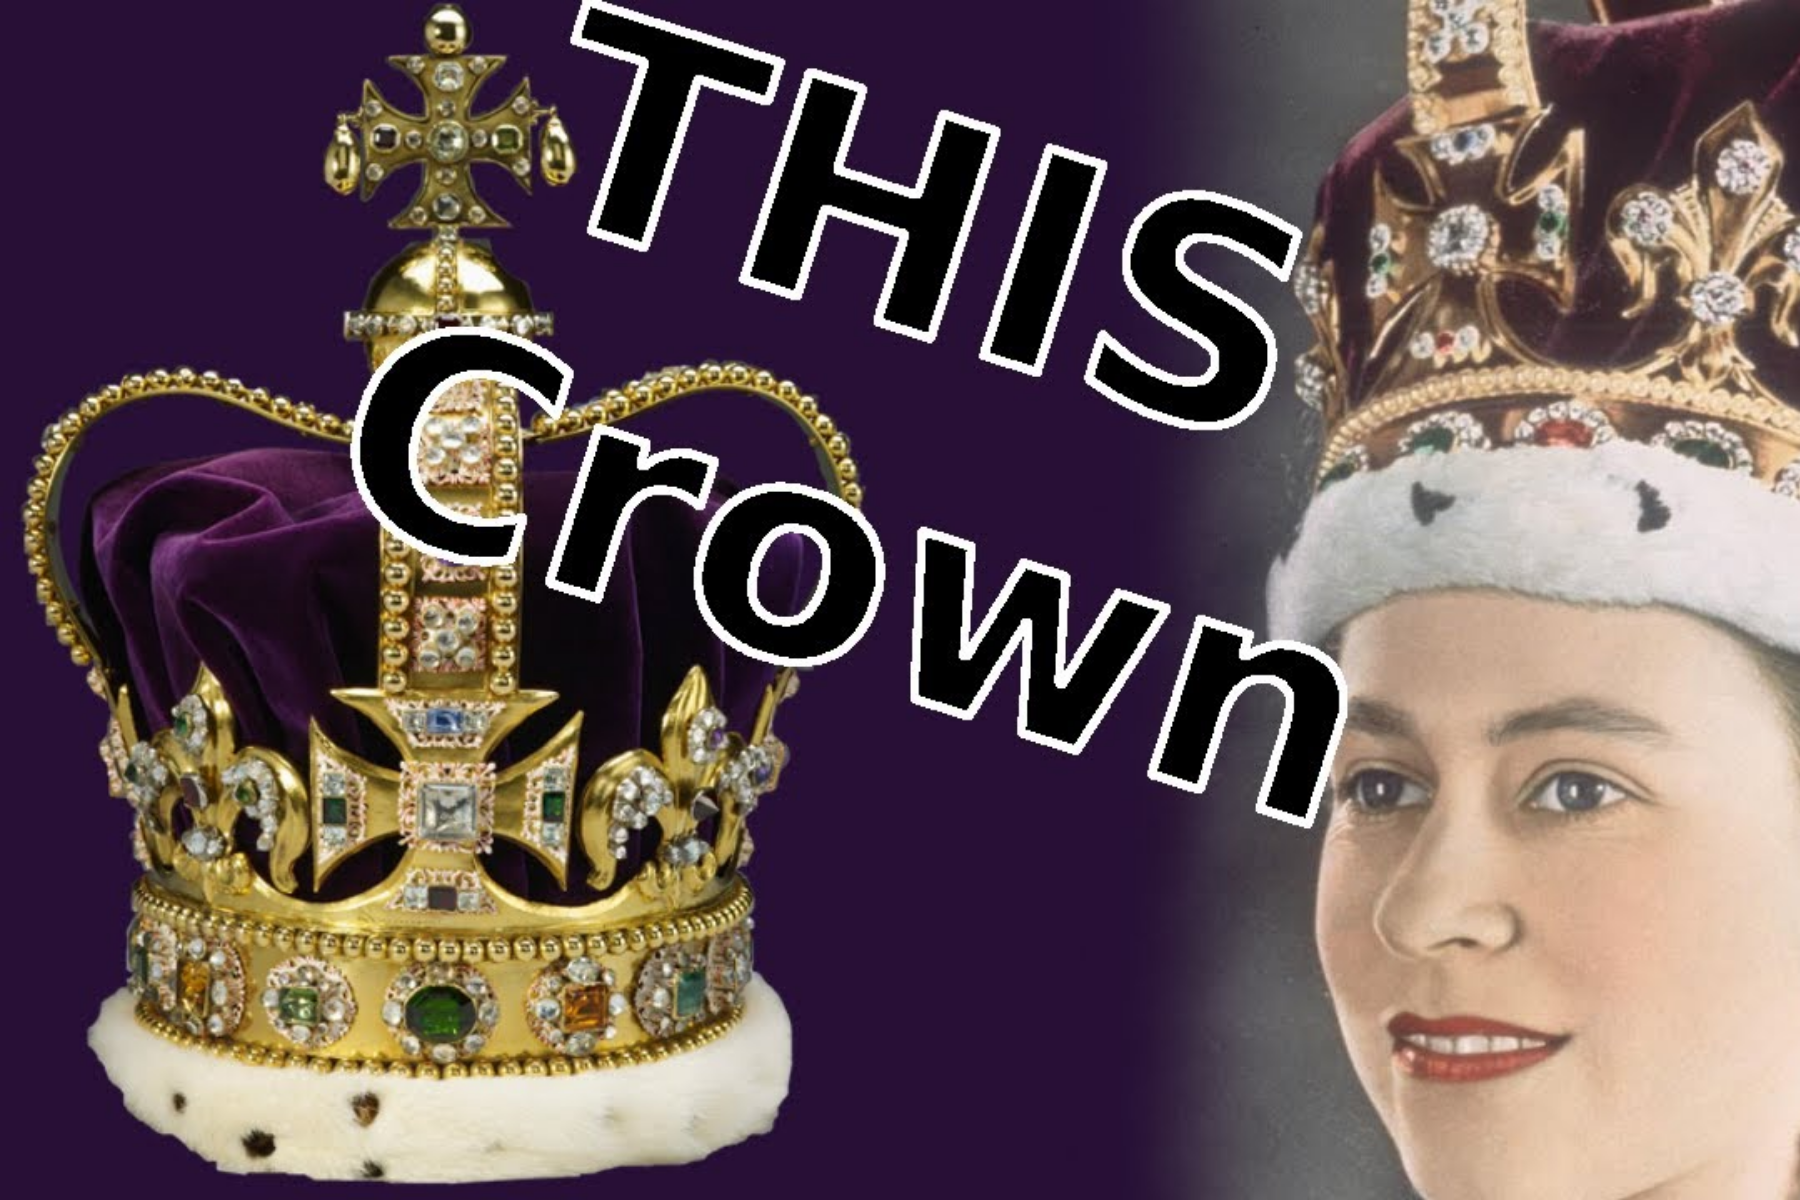 The St. Edward's crown 22-carat gold, with a circumference of 66 cm (26 in), measures 30 cm (12 in) tall, and weighs 2.23 kg (4.9 lb). It has four fleurs-de-lis and four crosses pattée, supporting two dipped arches topped by a monde and cross pattée and Queen Elizabeth is wearing it